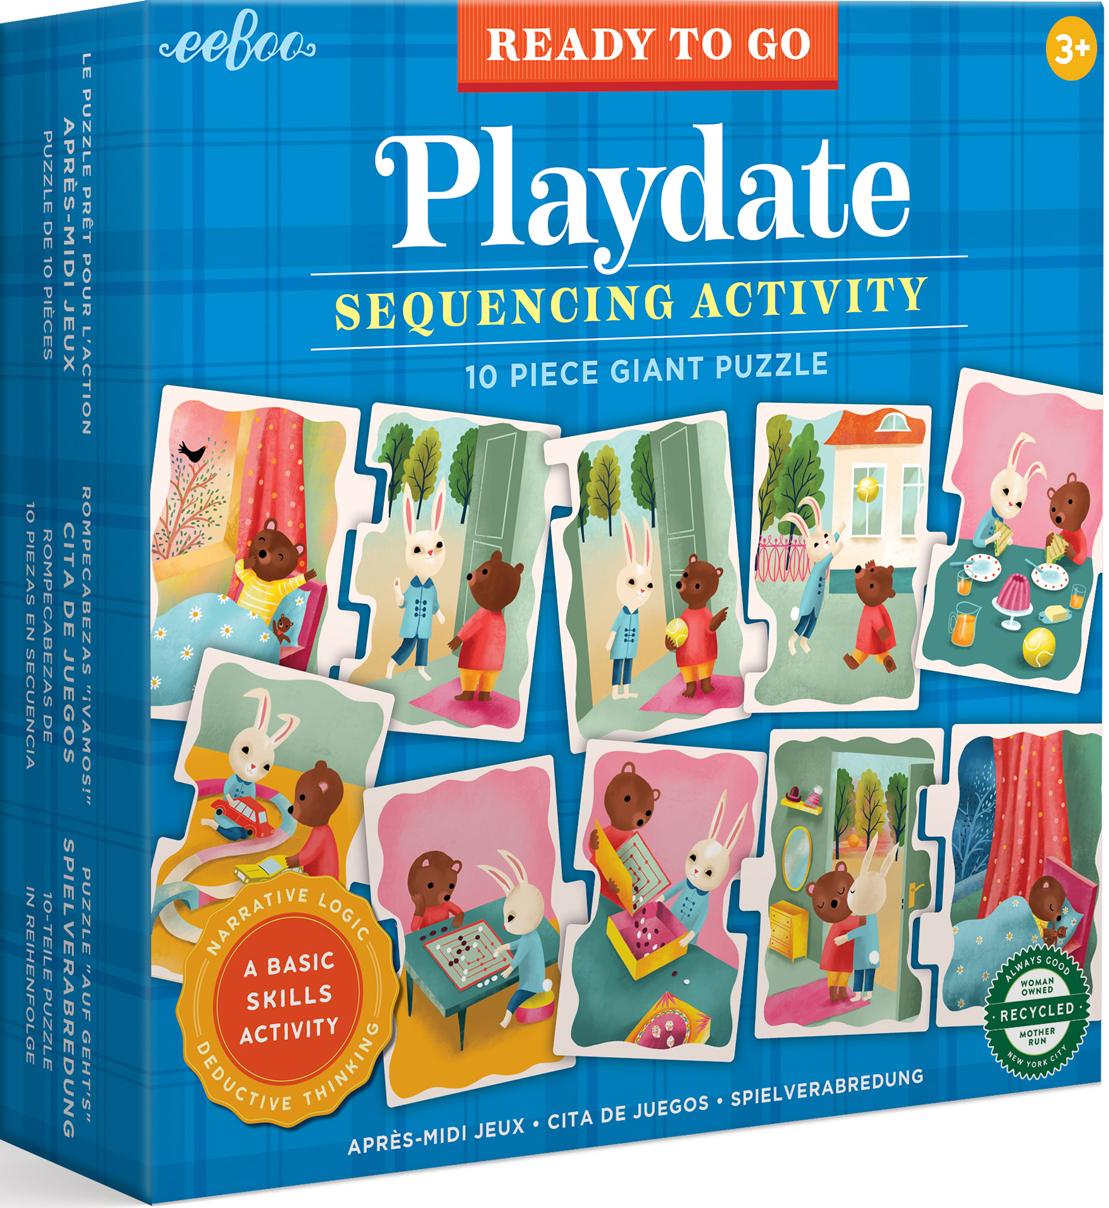 Ready to Go Puzzle - Playdate Educational Jigsaw Puzzle